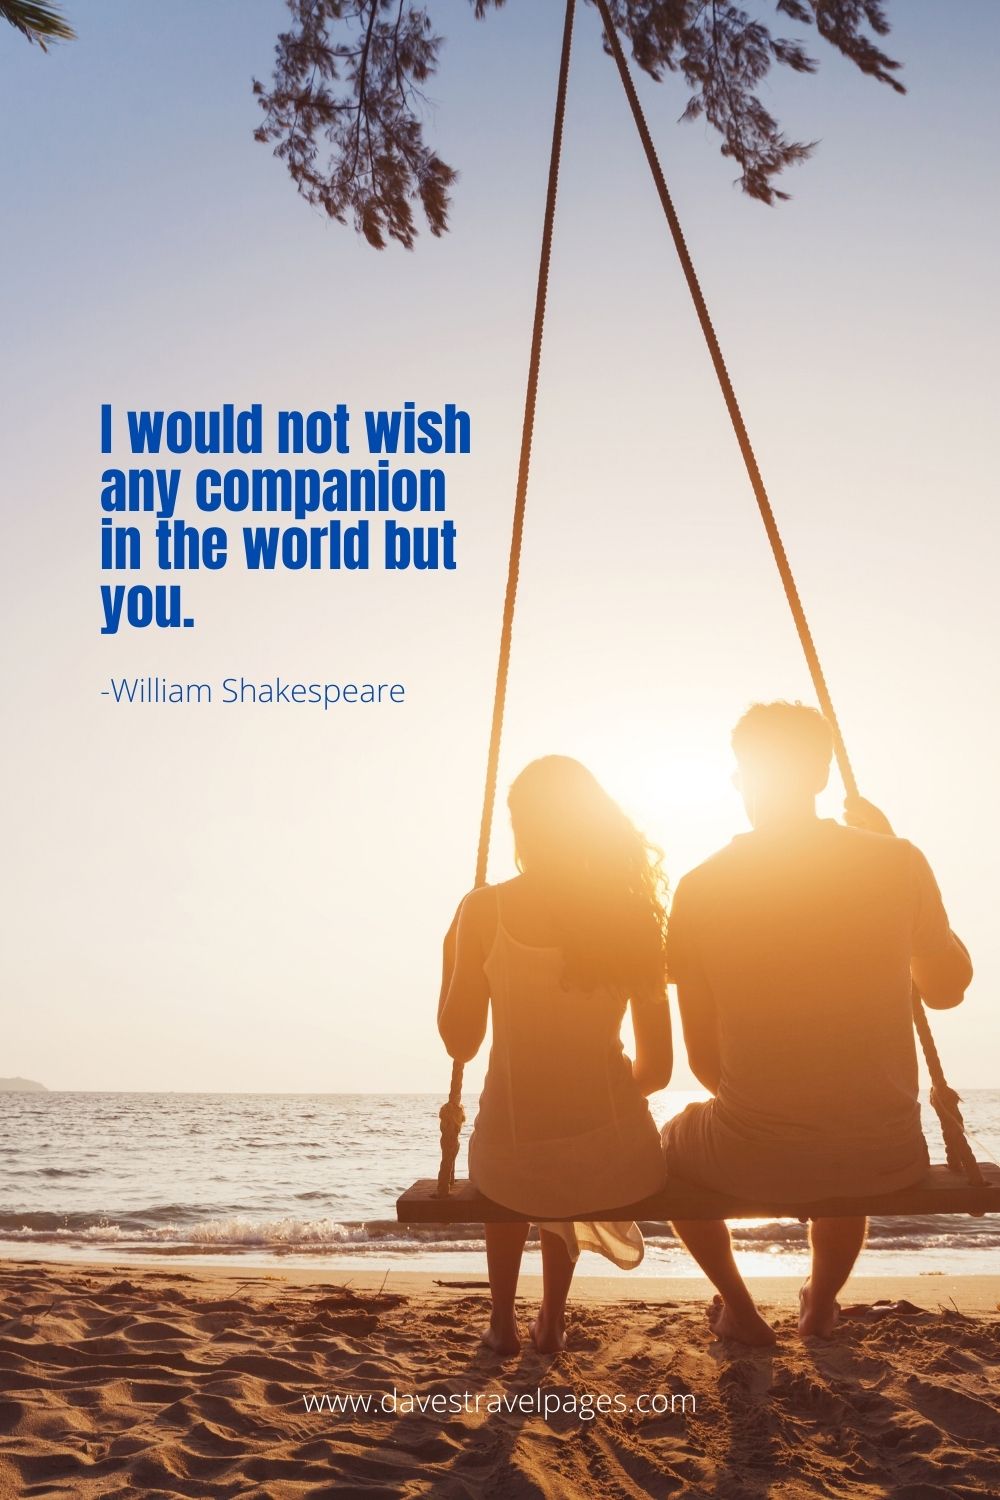 Companion Quote: I would not wish any companion in the world but you.